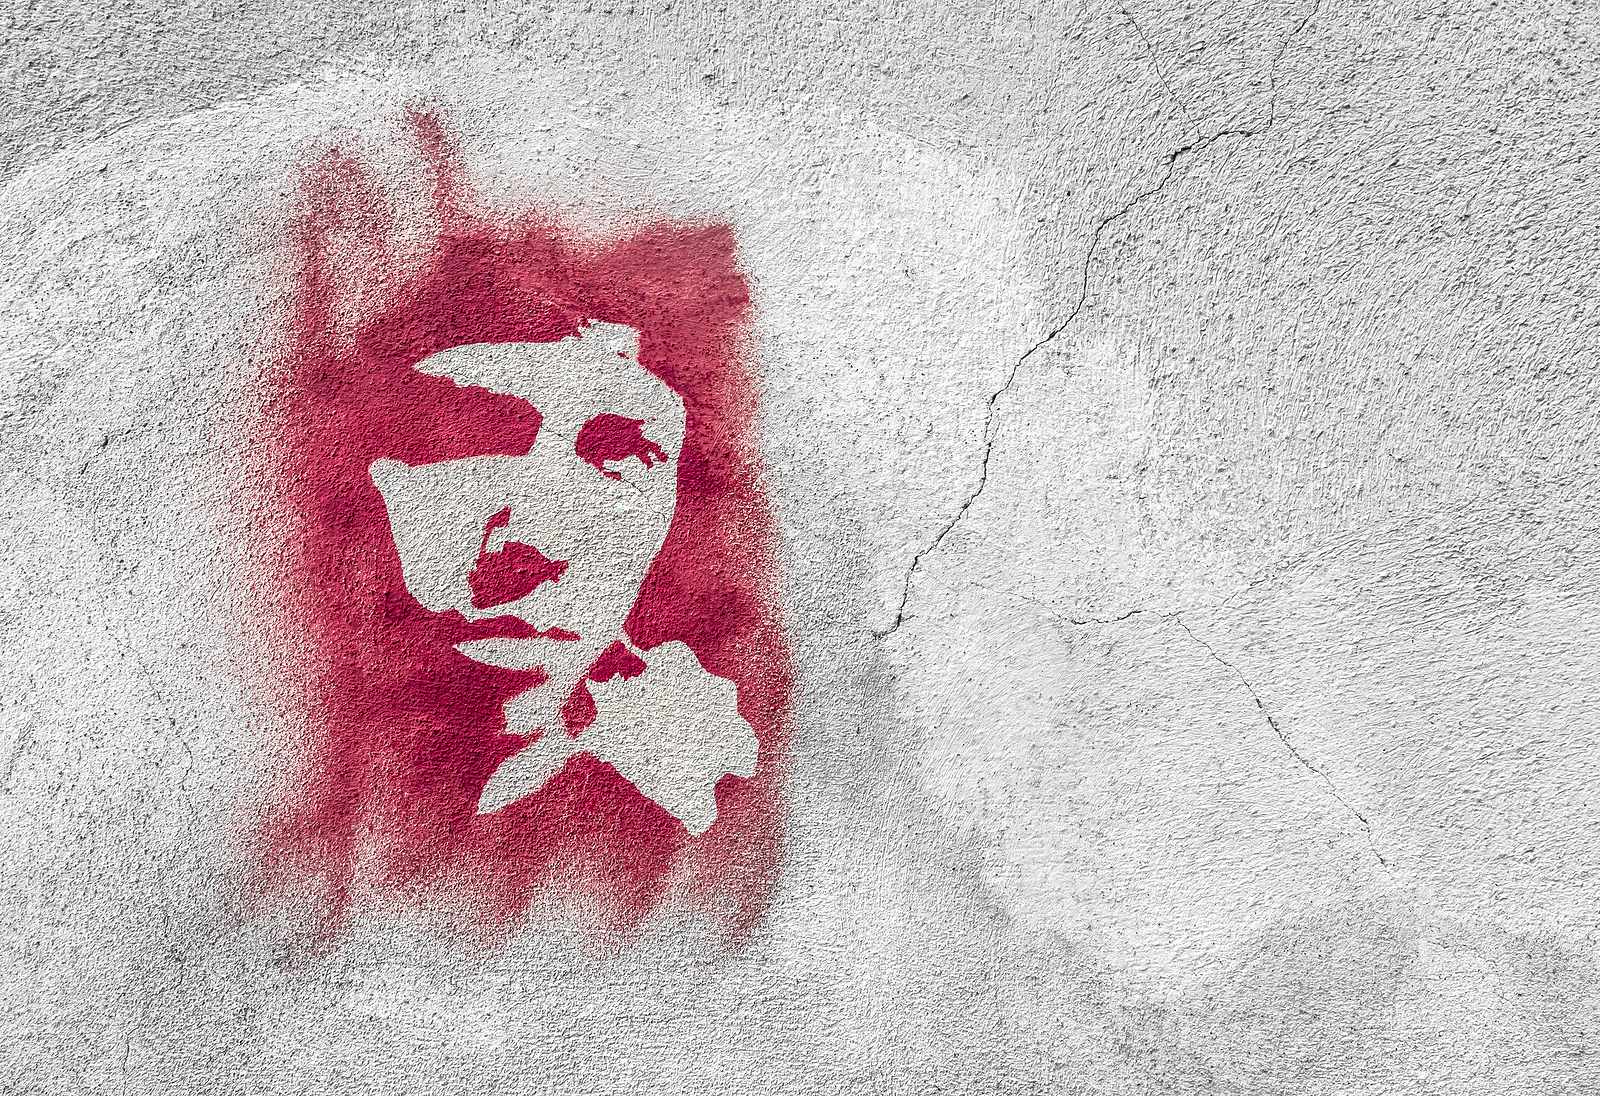 Why Is Stencil Art So Popular Among Street Artists